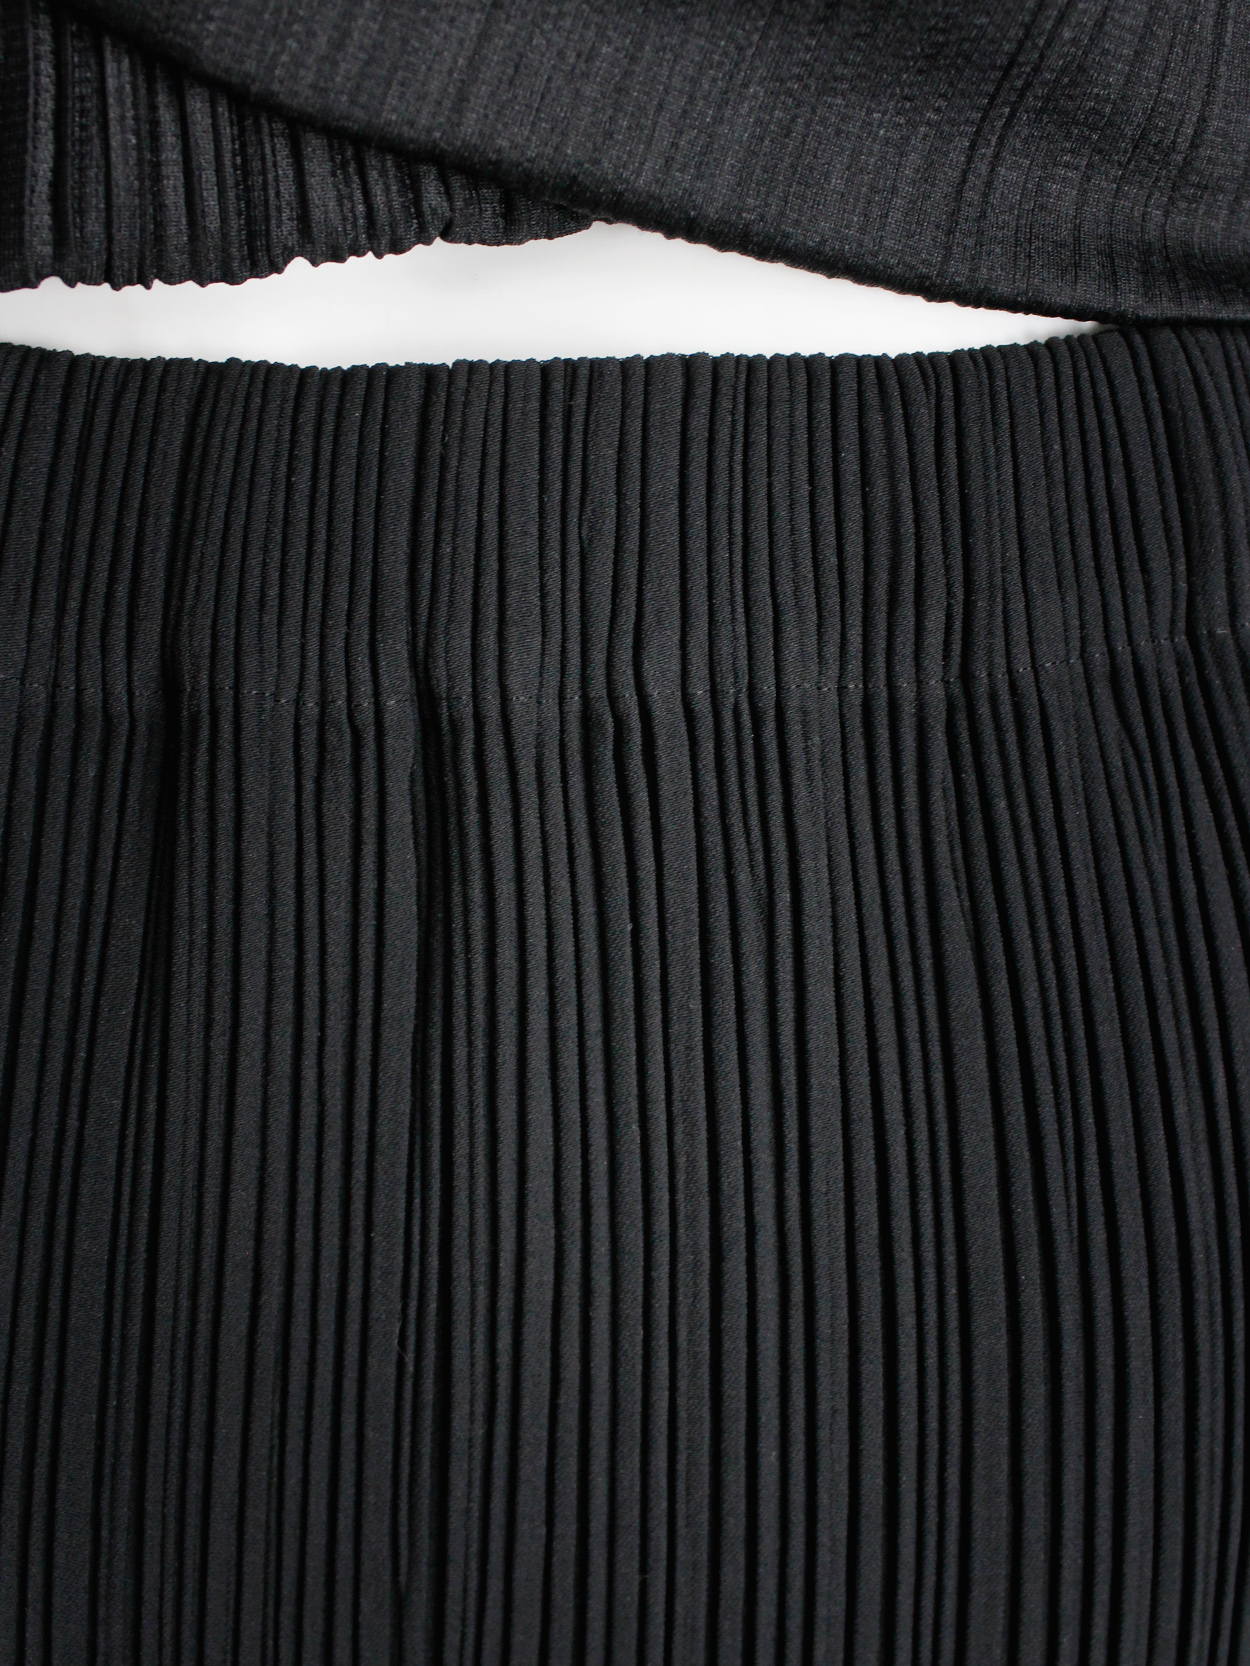 Issey Miyake black maxi skirt with fine pressed pleats - V A N II T A S